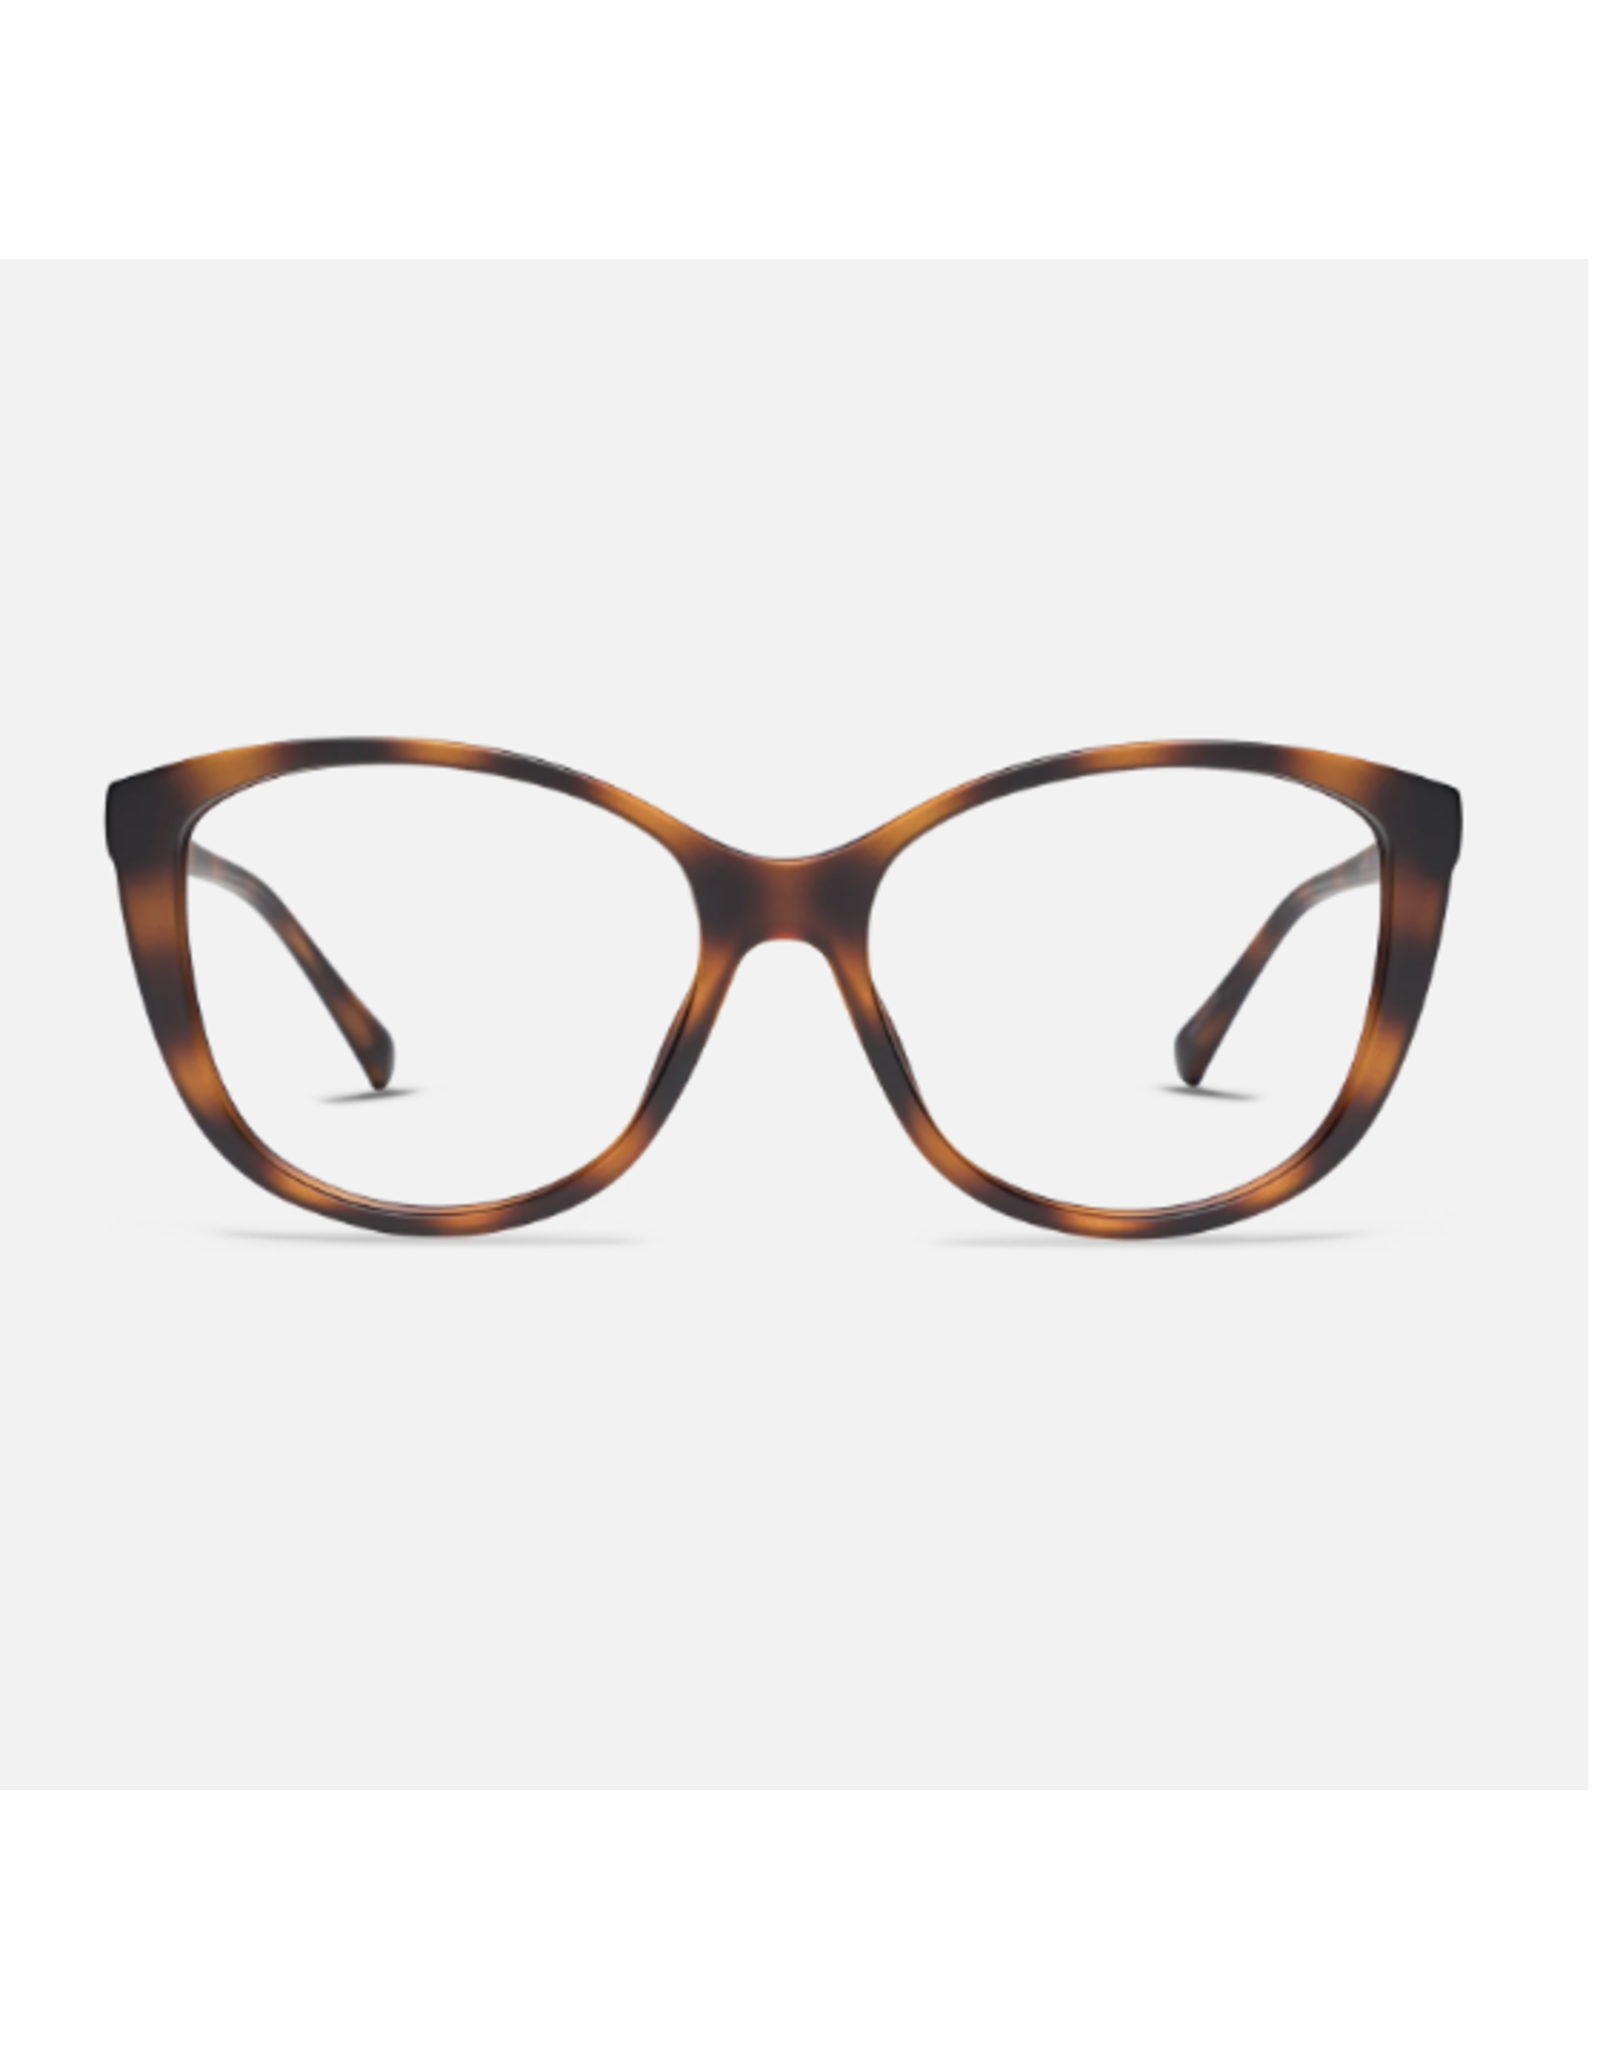 LOOK Hanna Readers in Tortoise, 2.0 Magnification